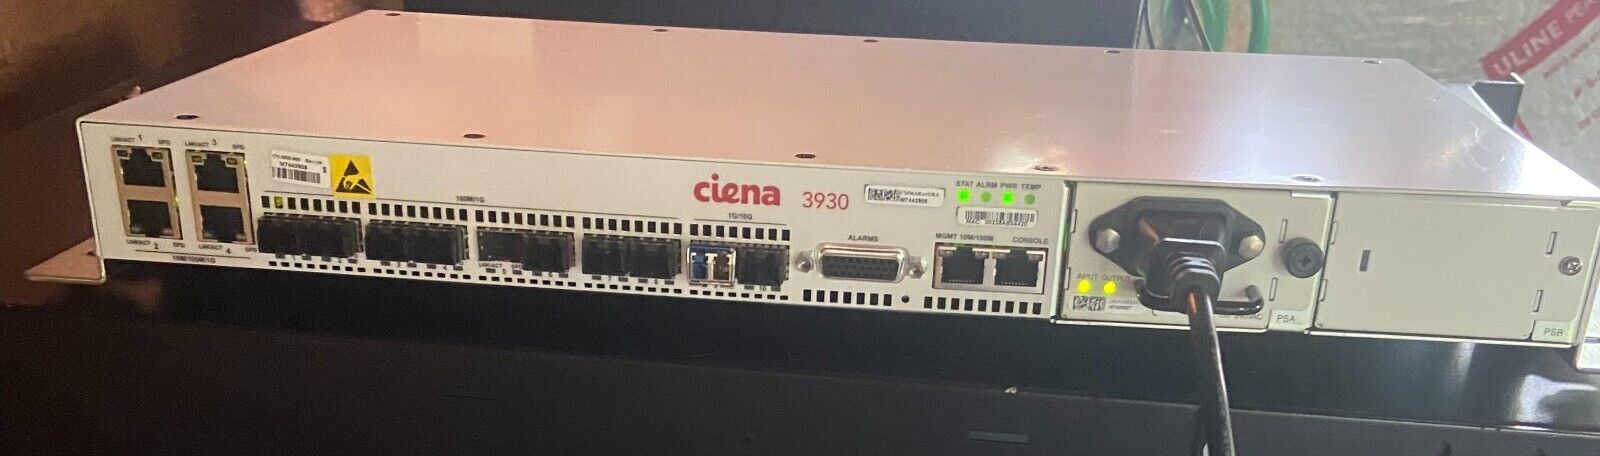 CIENA 3930 MODEL 170-3930-900  SERVICE DELIVERY NETWORK SWITCH.